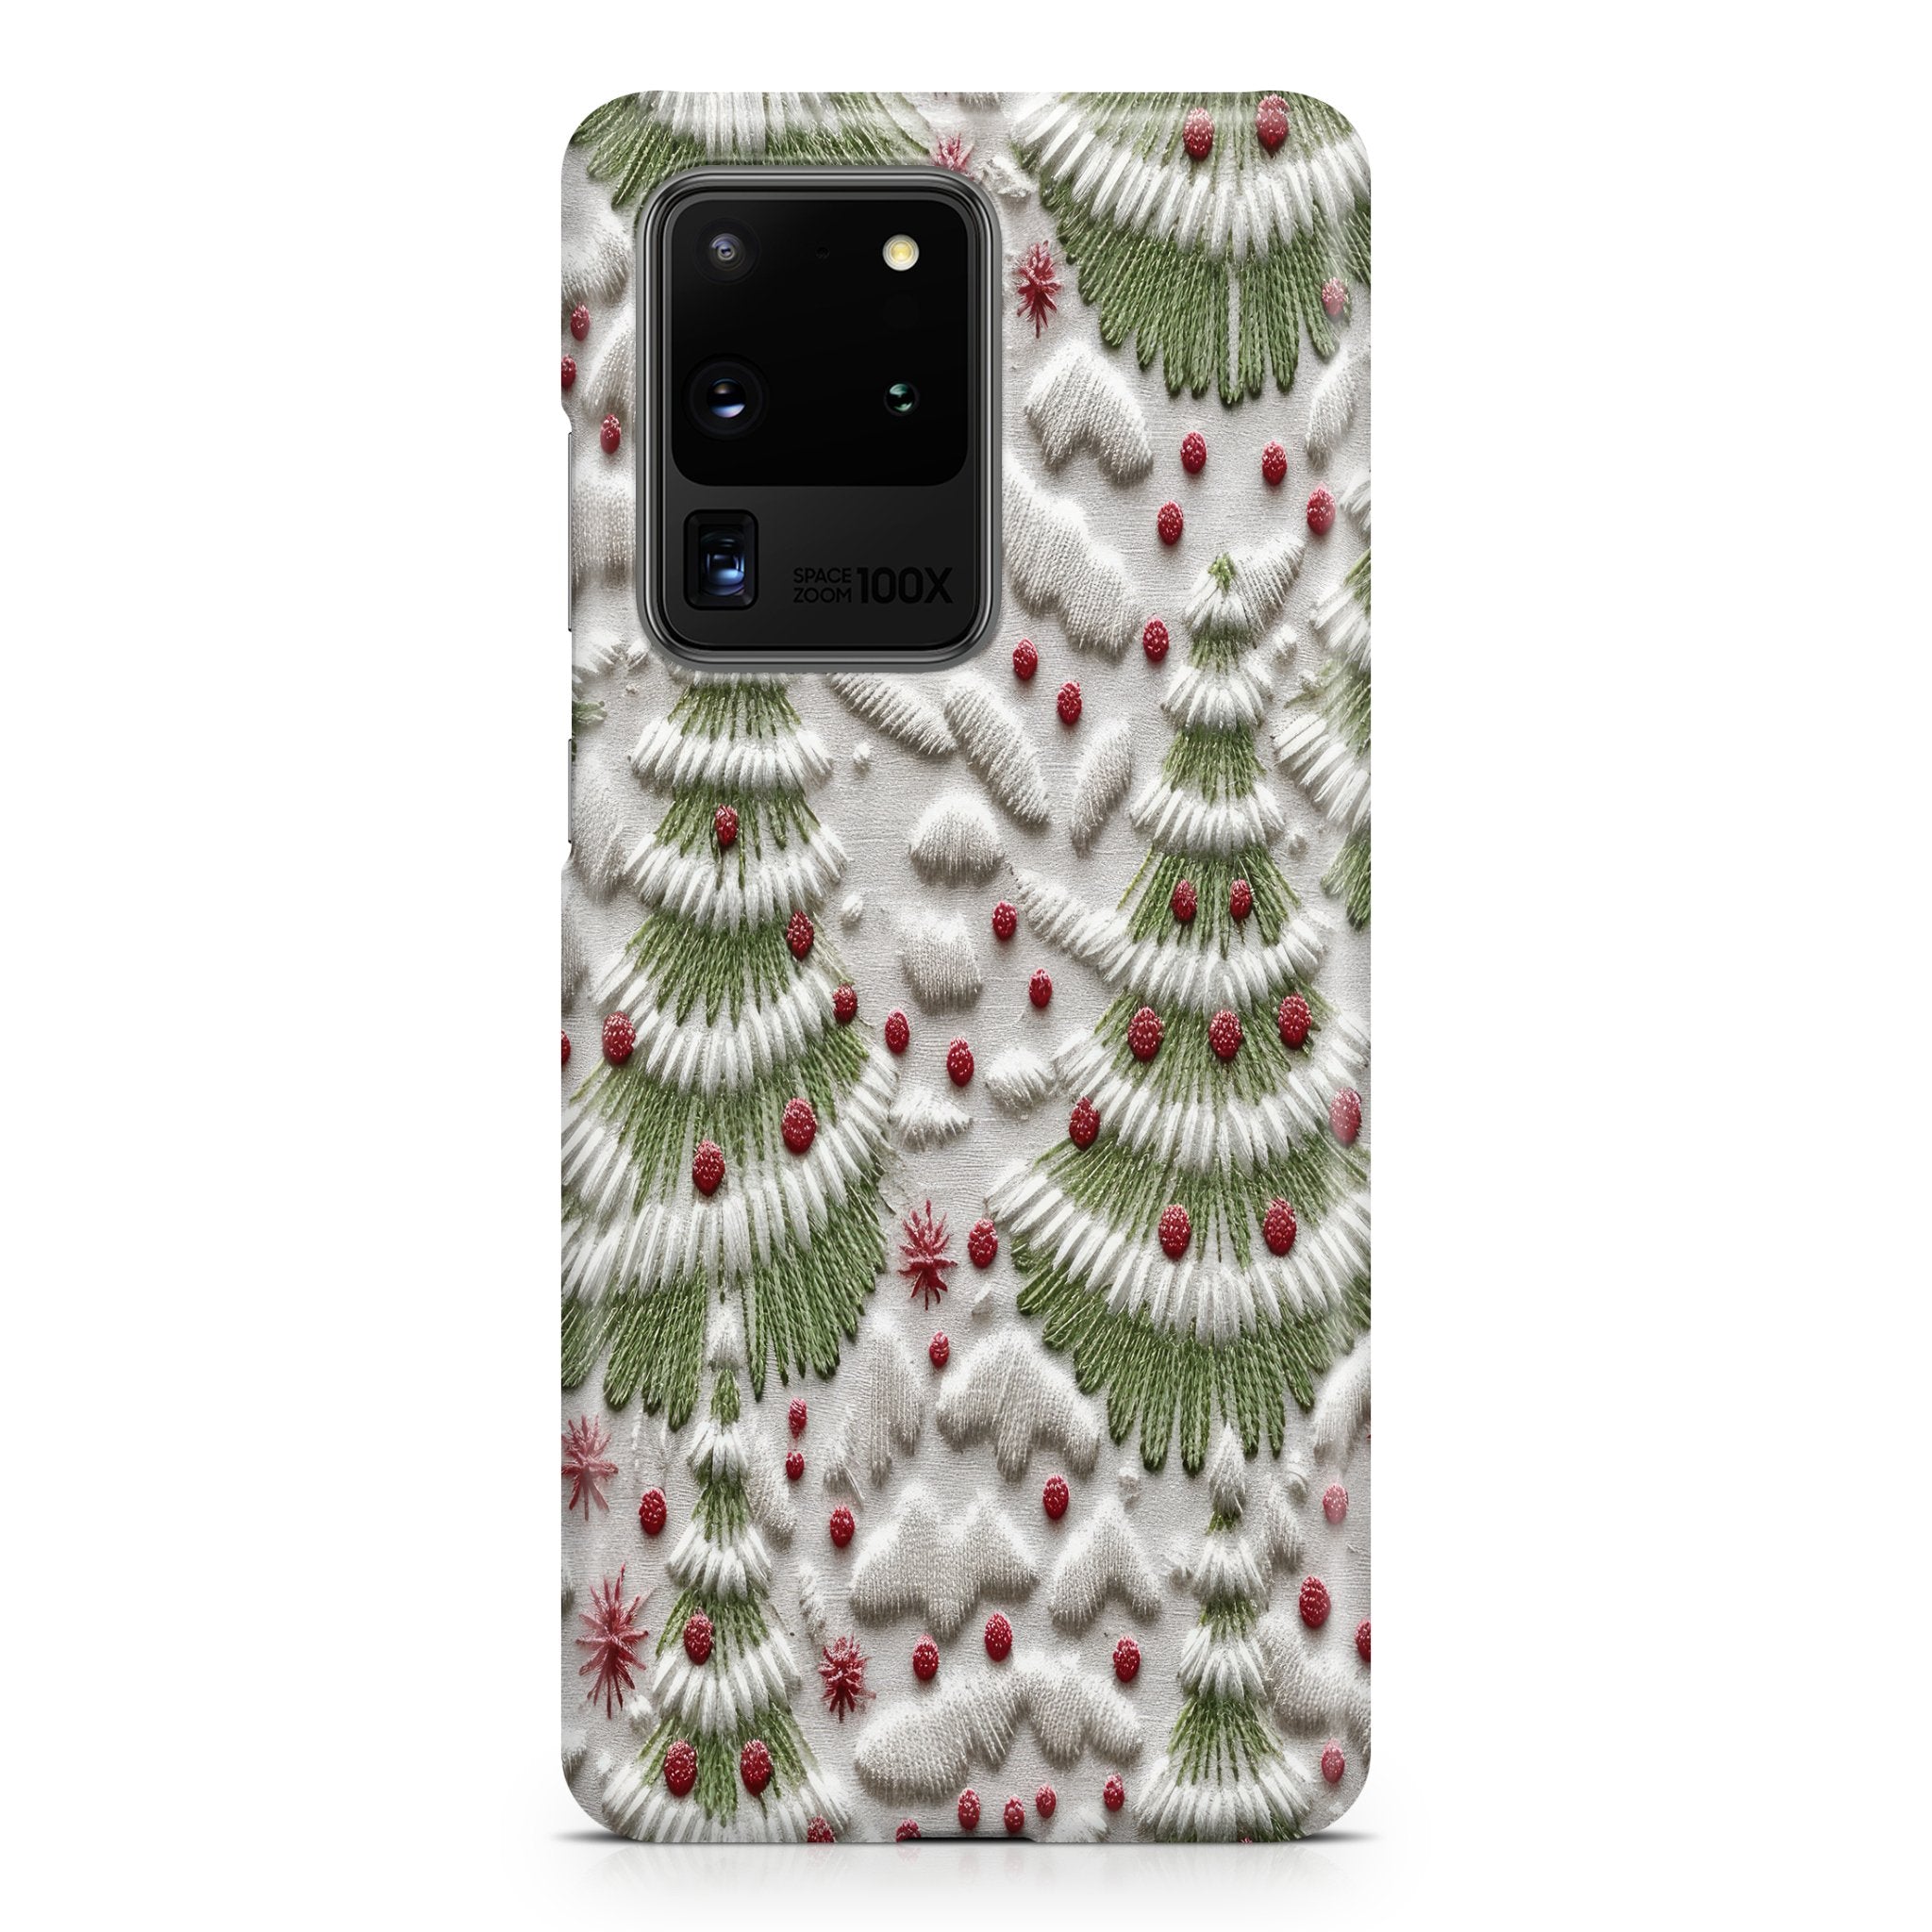 Winter Berries - Samsung phone case designs by CaseSwagger